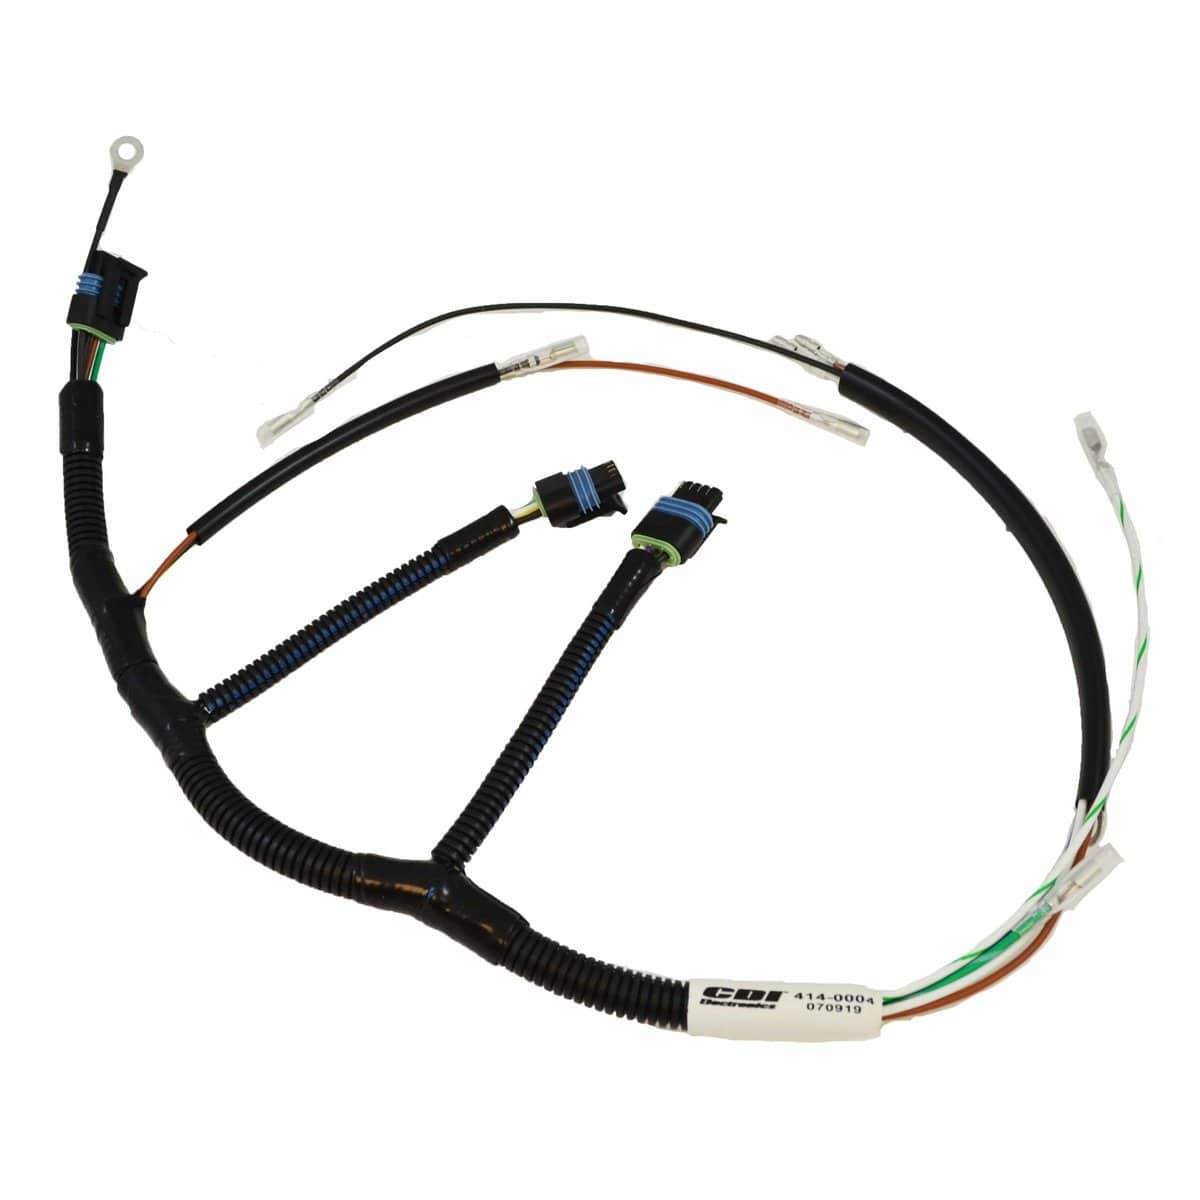 CDI Qualifies for Free Shipping CDI Wiring Harness for Mercury 3 Cyl #414-0004